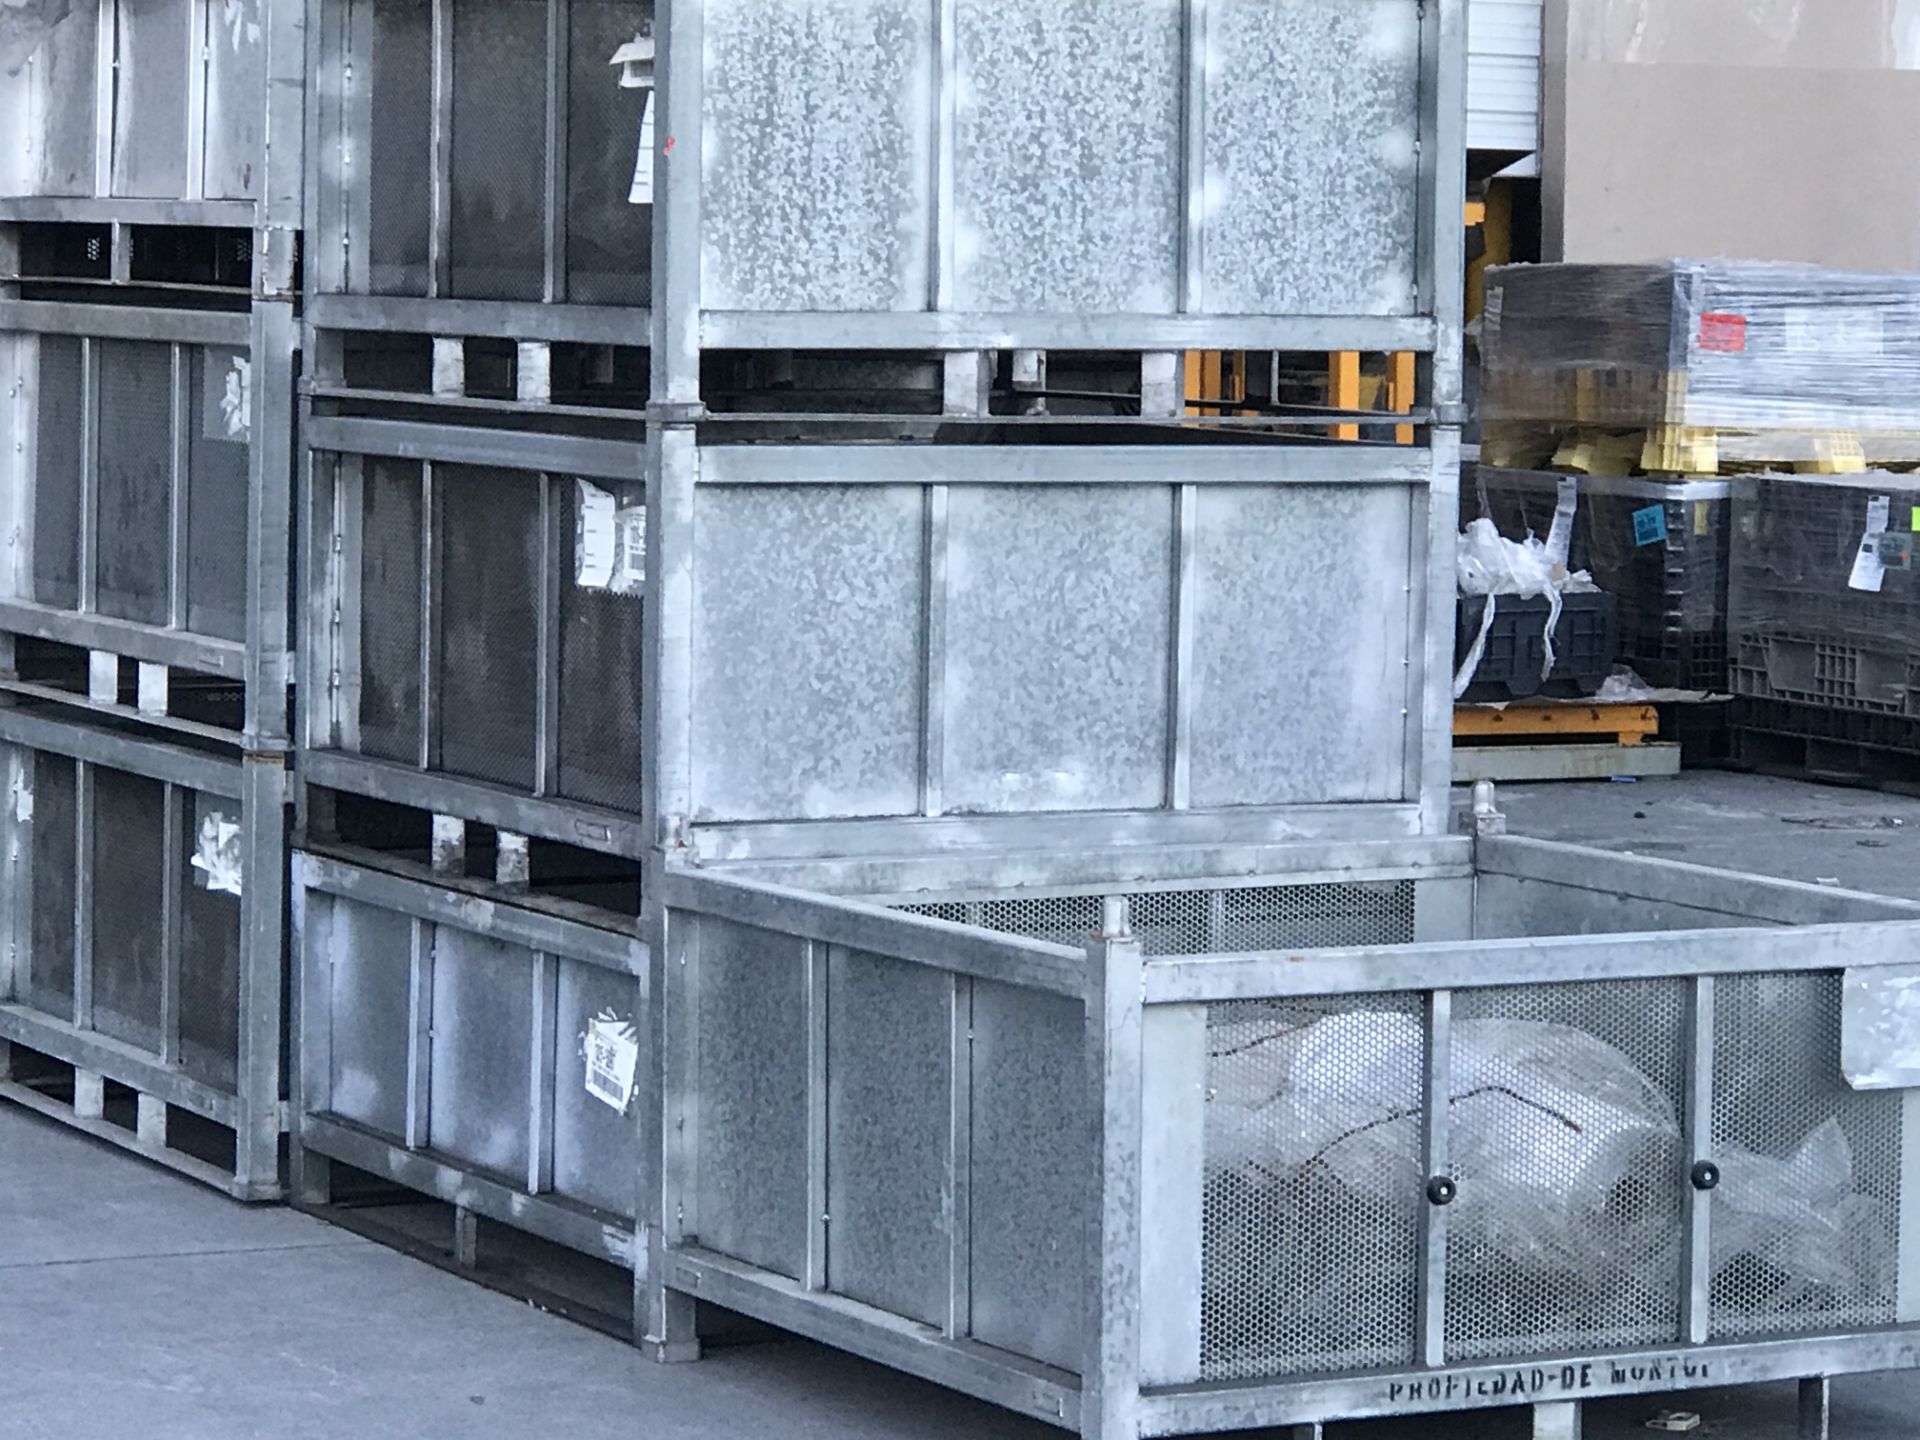 70 GALVANIZED STEEL CONTAINERS XYTEC (DIMENSIONS 0.60x1.32x1.24 METERS) - Image 5 of 8